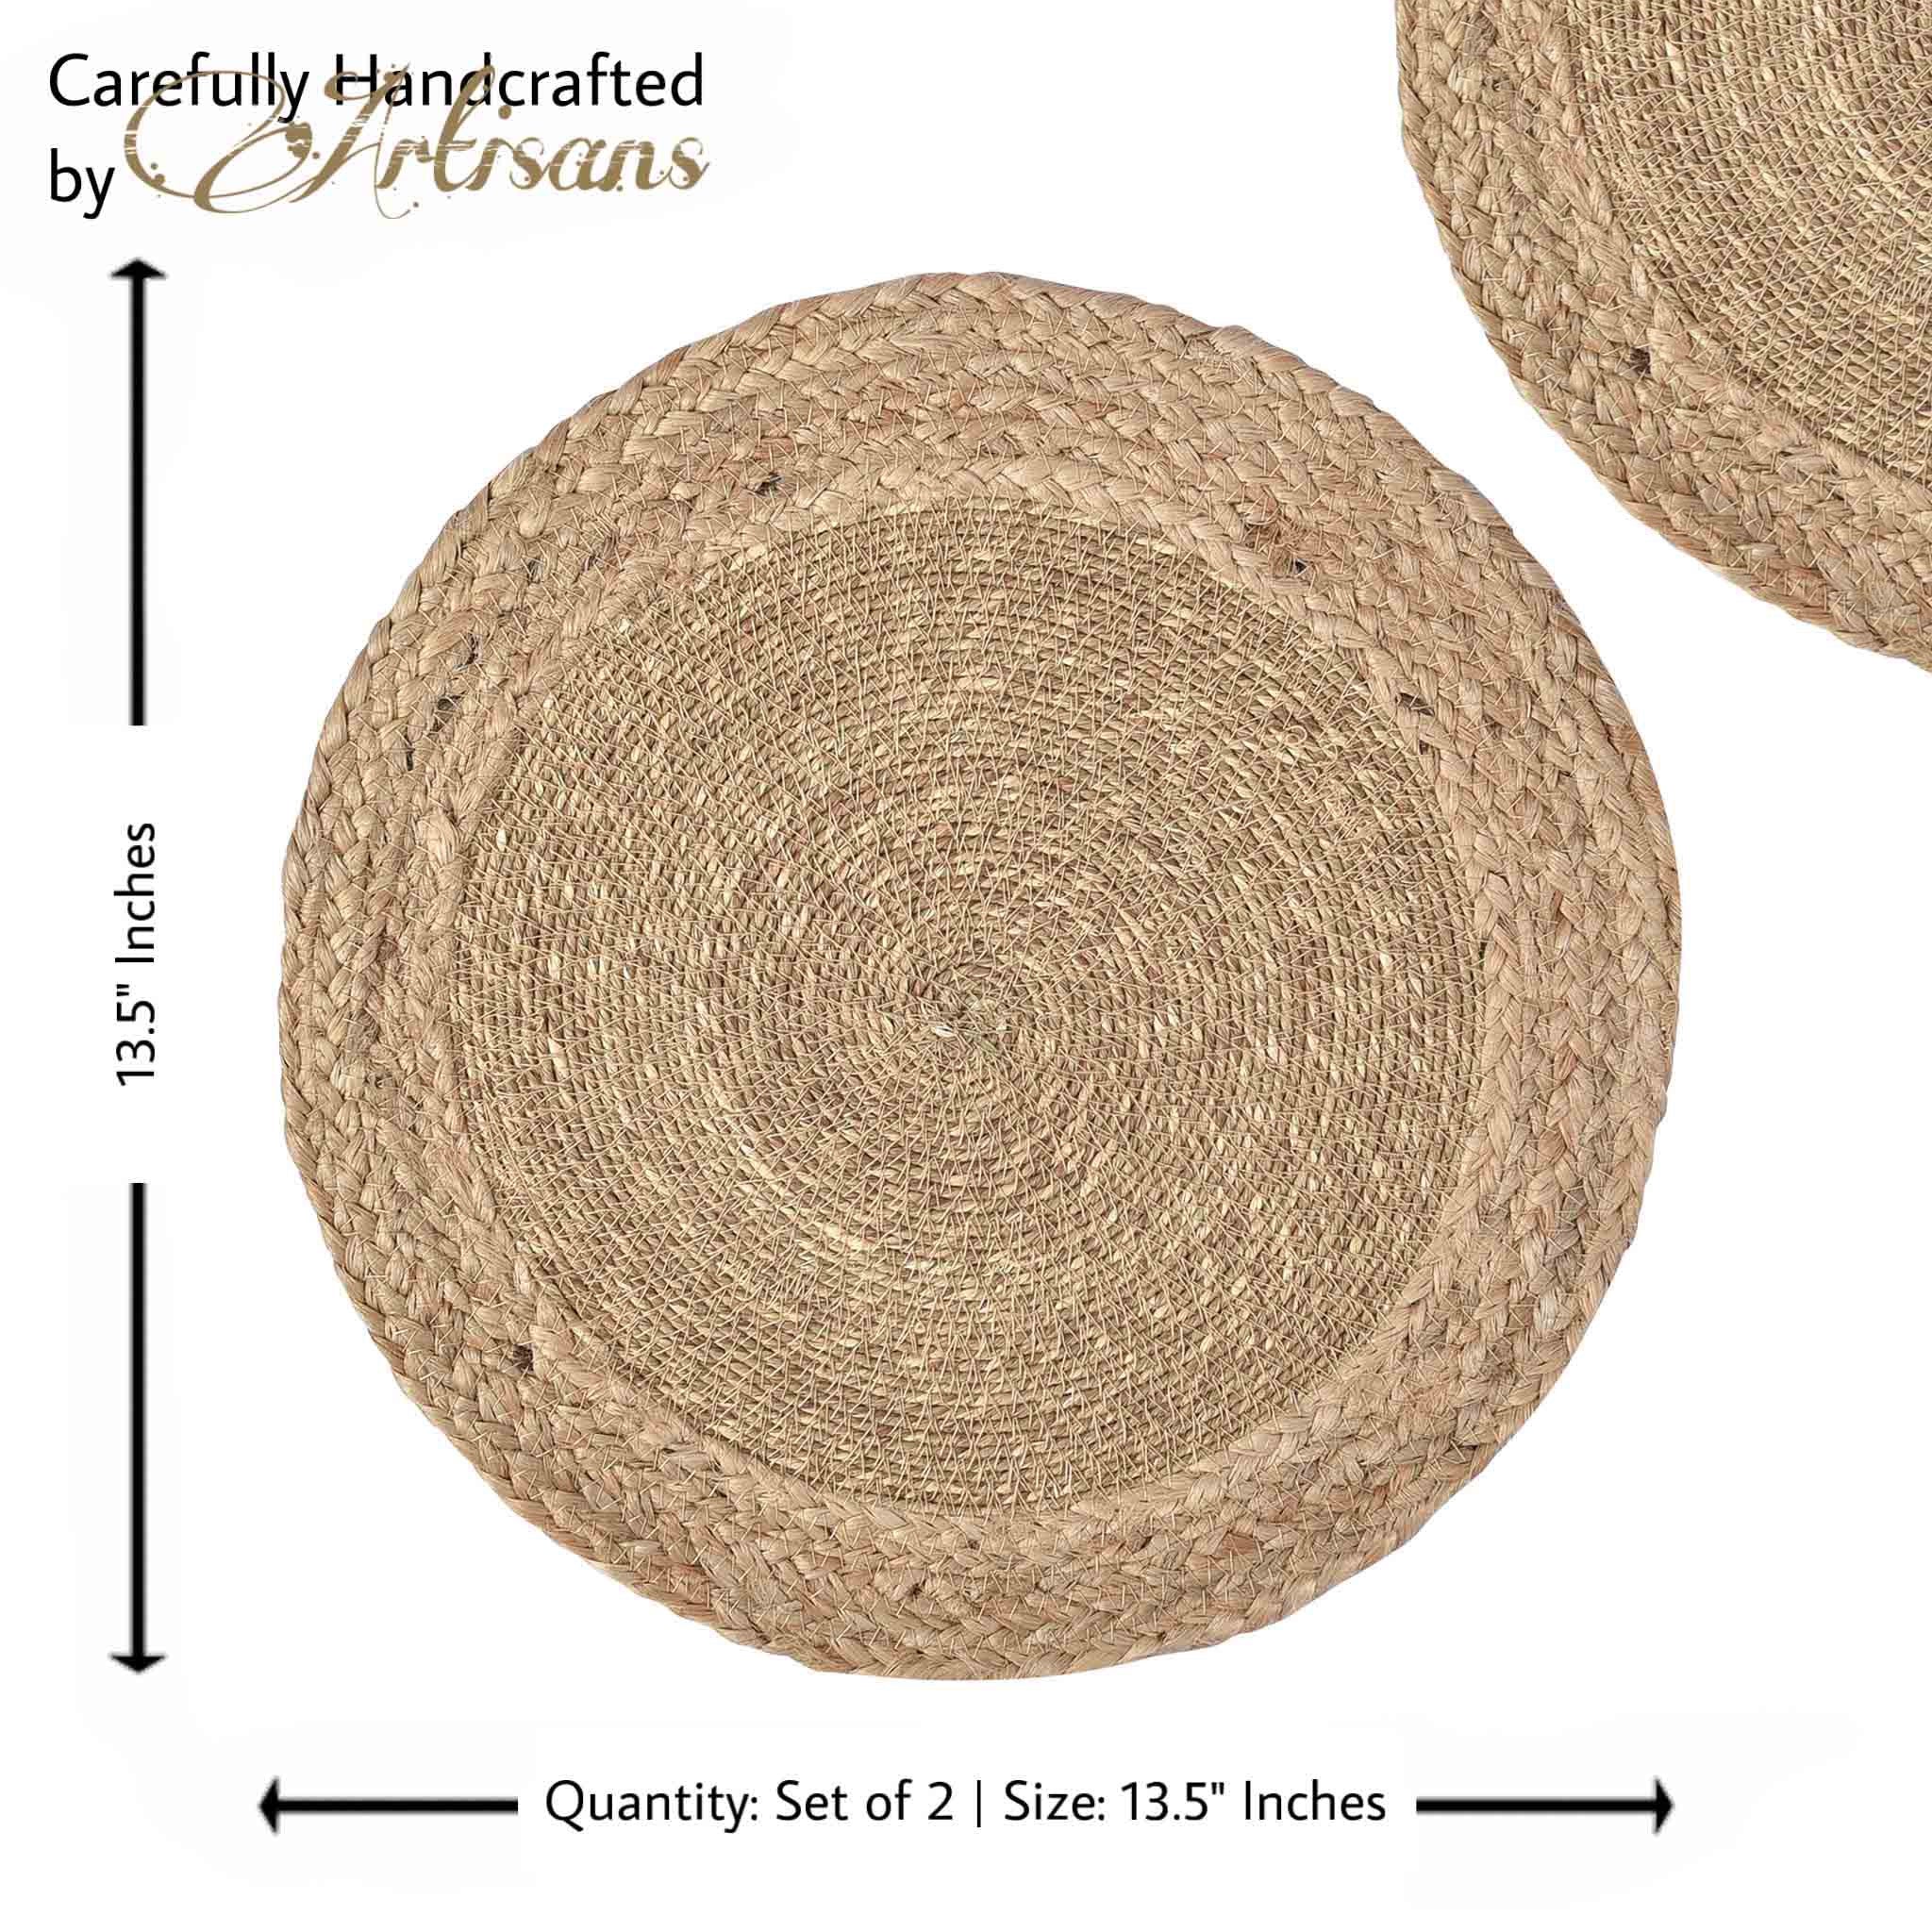 Braided Jute Placemat in Natural, Set of 2/4